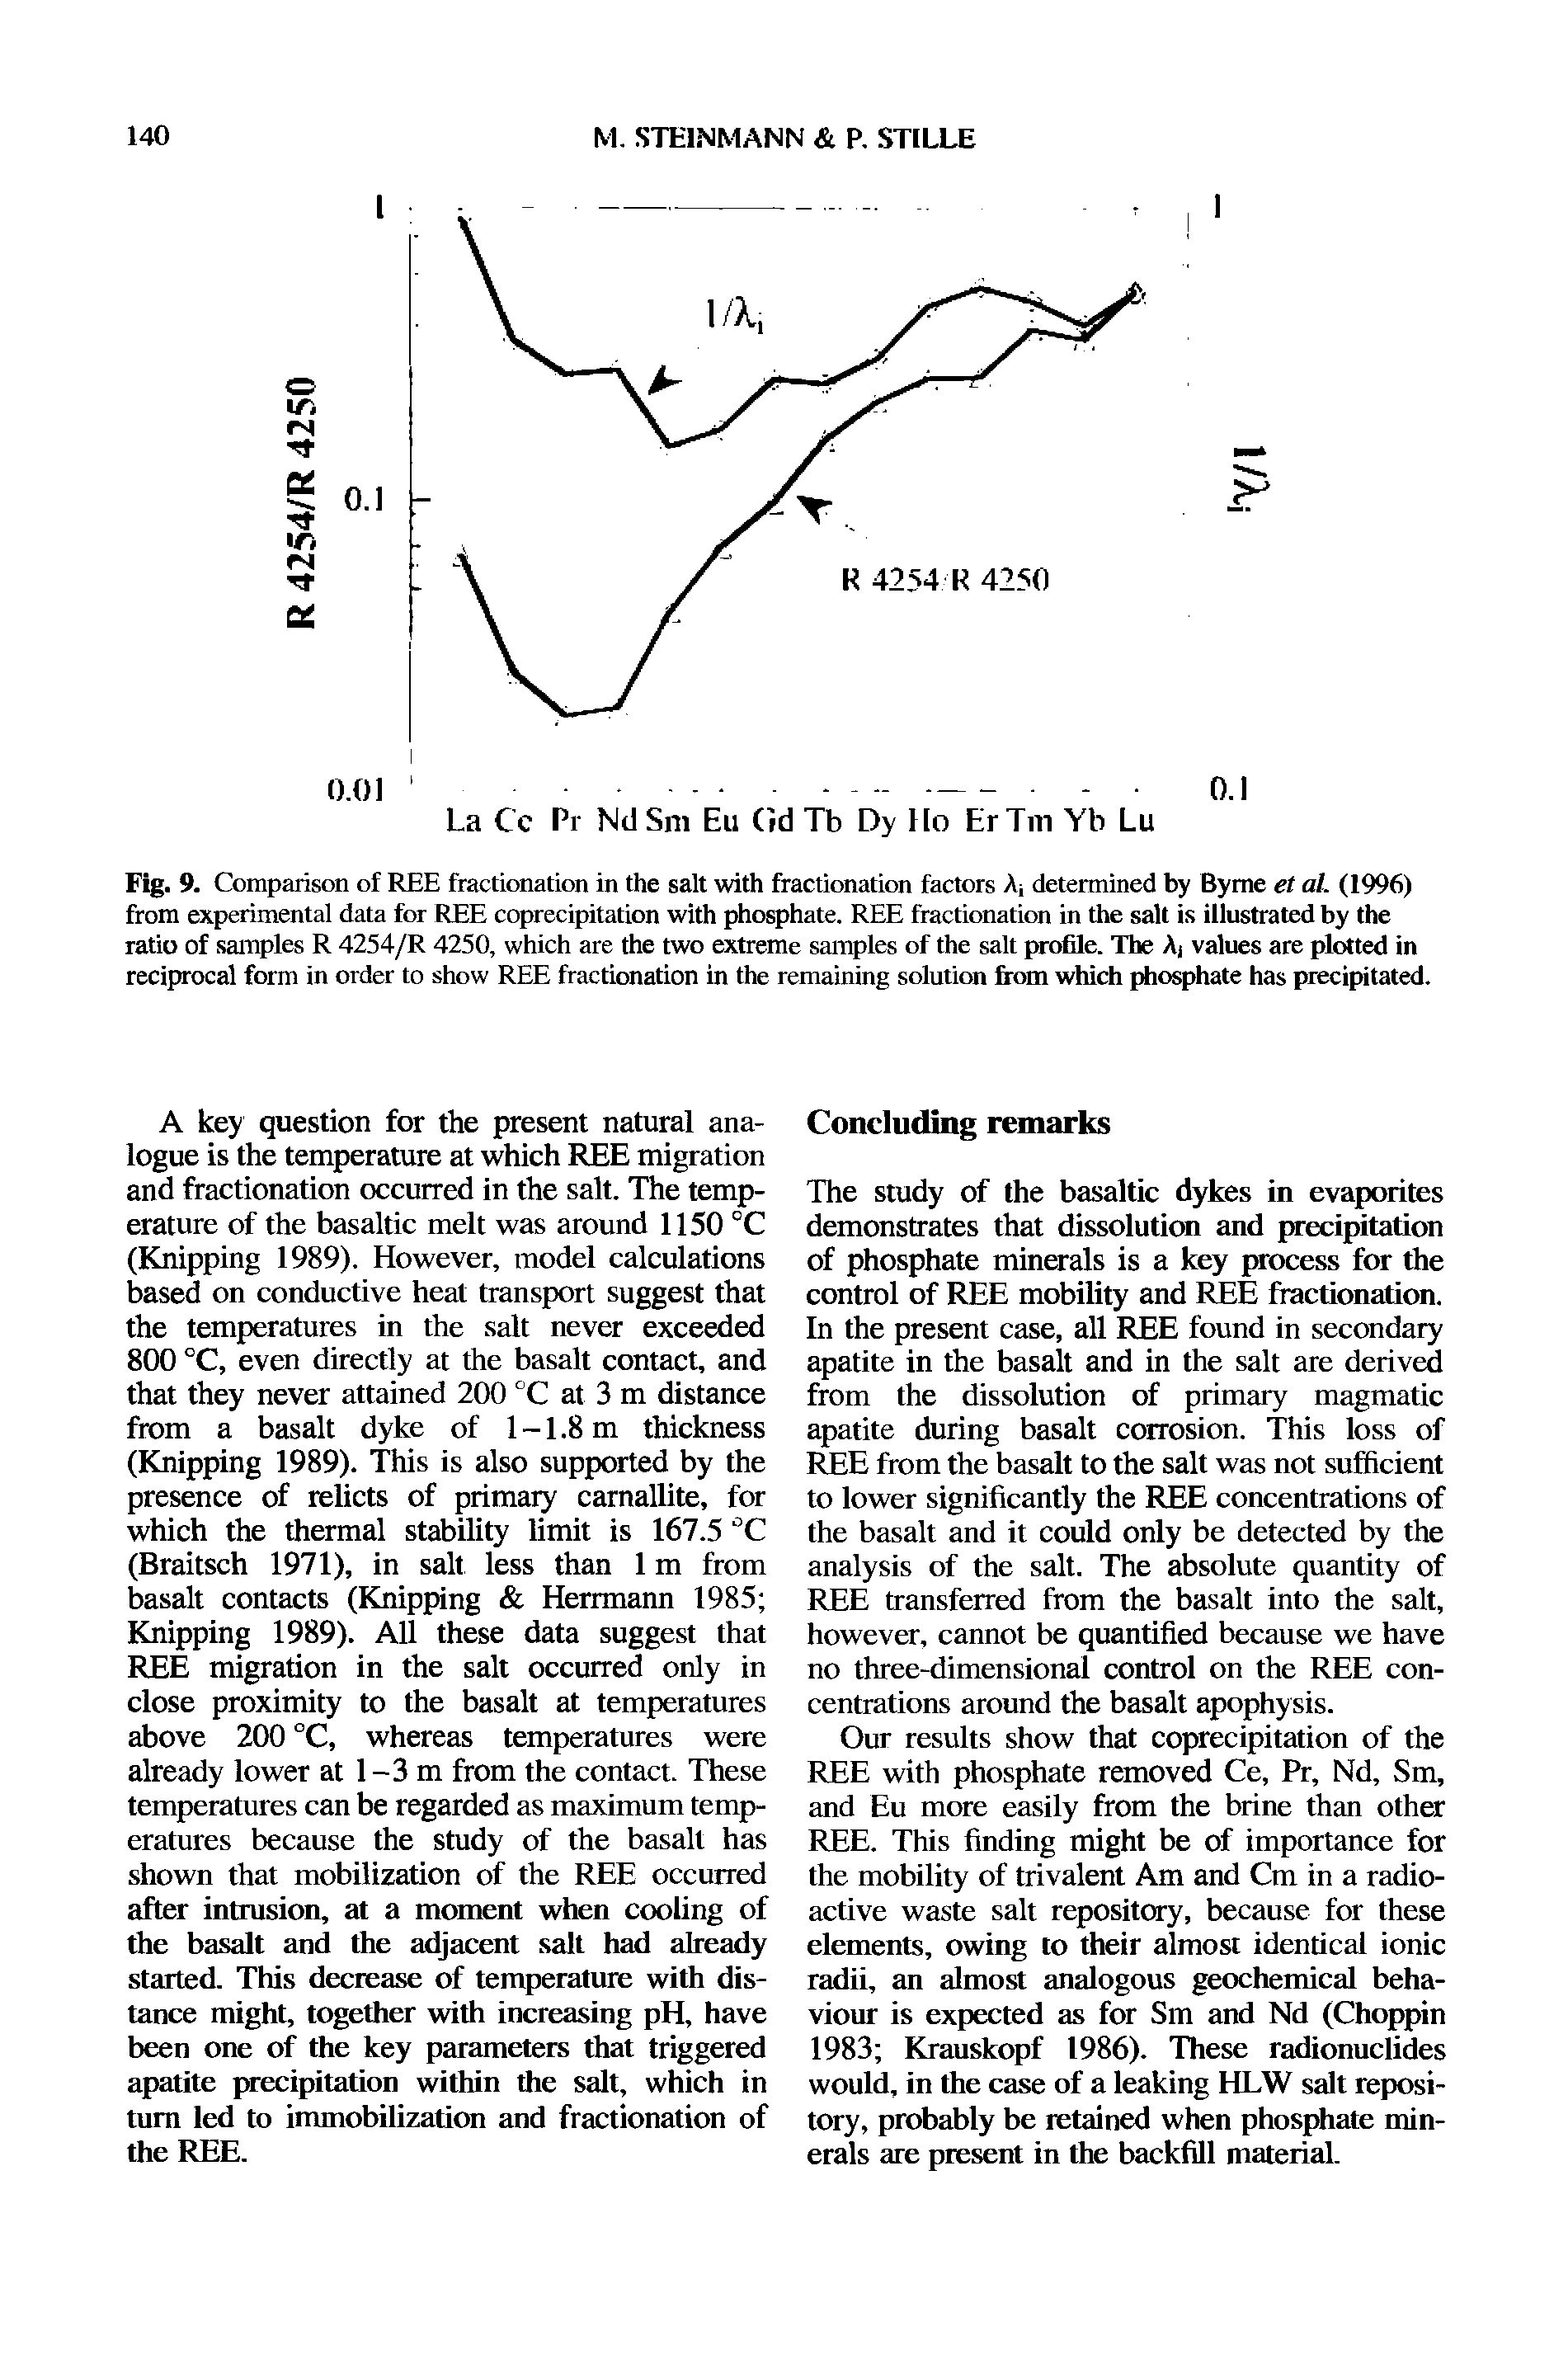 Fig. 9. Comparison of REE fractionation in the salt with fractionation factors X, determined by Byrne et al. (1996) from experimental data for REE coprecipitation with phosphate. REE fractionation in the salt is illustrated by the ratio of samples R 4254/R 4250, which are the two extreme samples of the salt profile. The A values are plotted in reciprocal form in order to show REE fractionation in the remaining solution from which phosphate has precipitated.